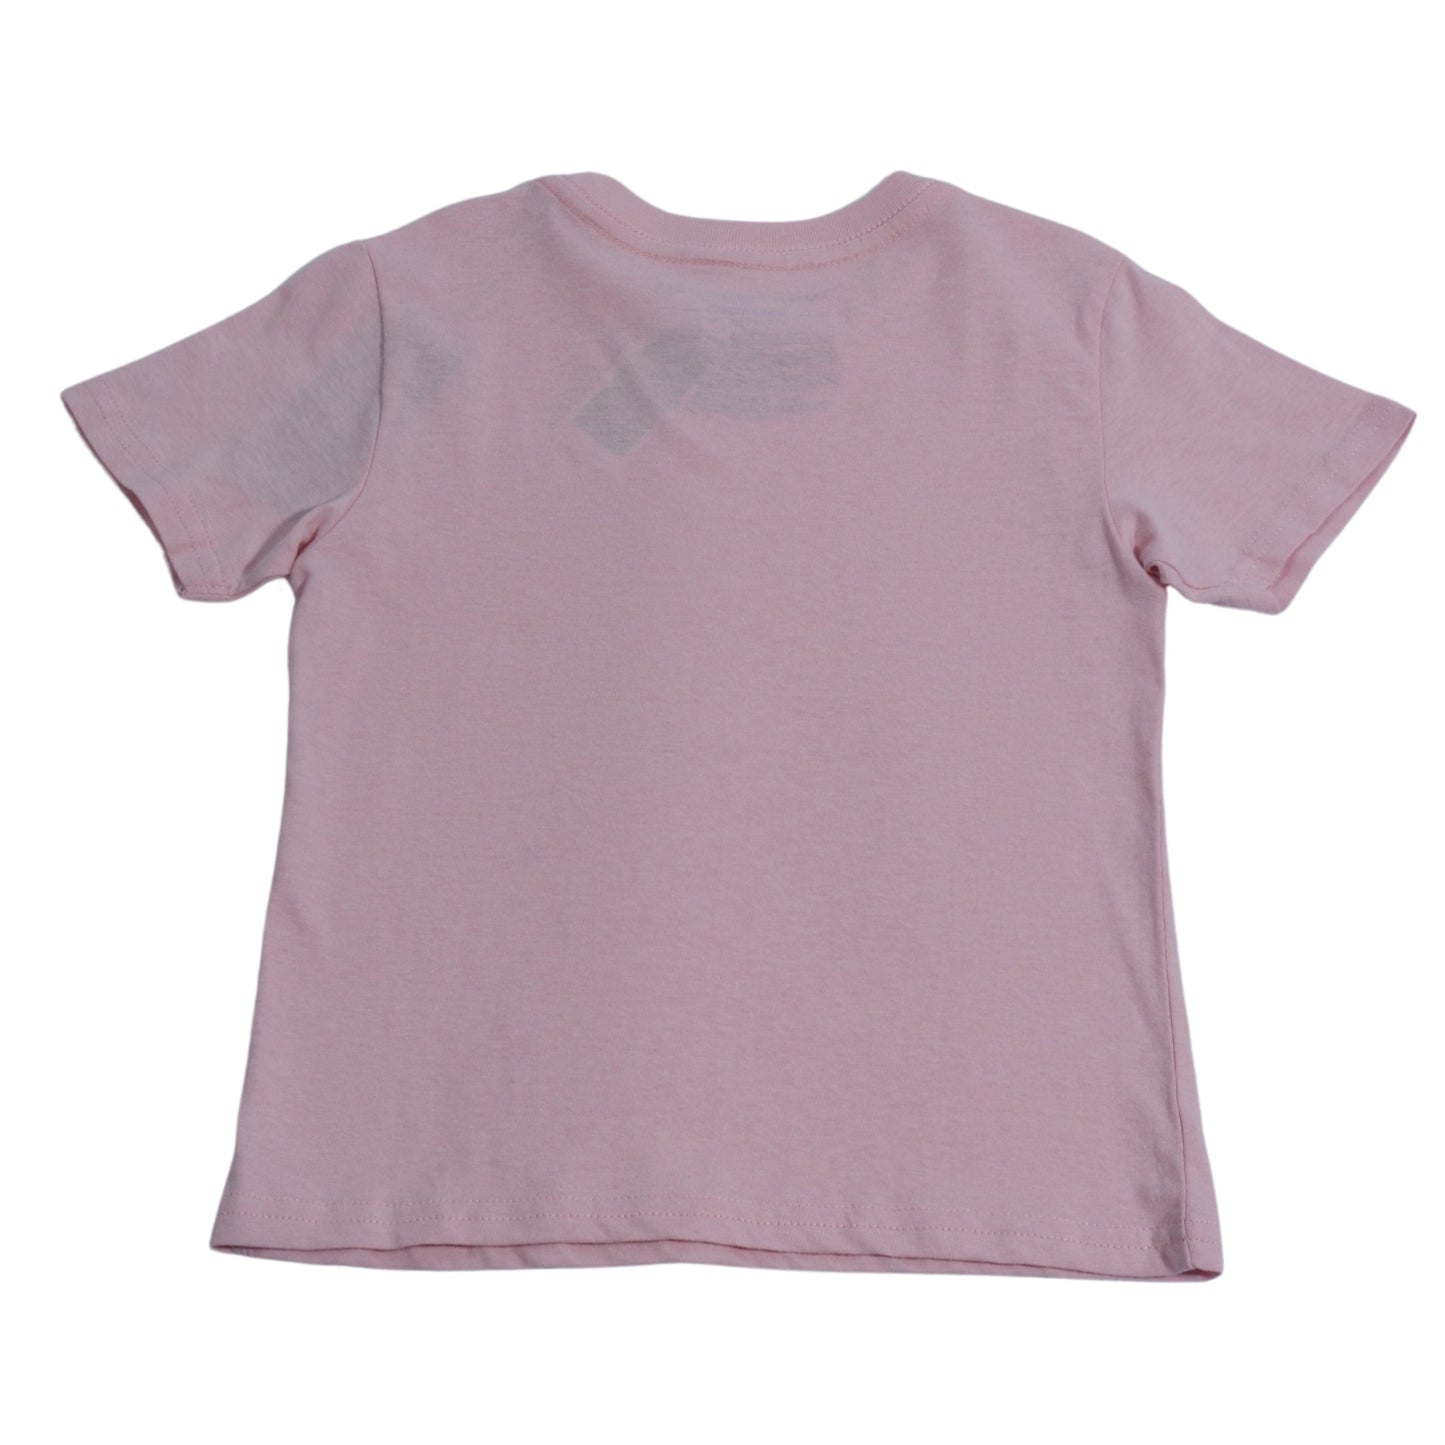 ORIGINAL Baby Girl 3 Years / Pink ORIGINAL - Baby - Front Branding And Logo Embroidery At Sleeve T-Shirt